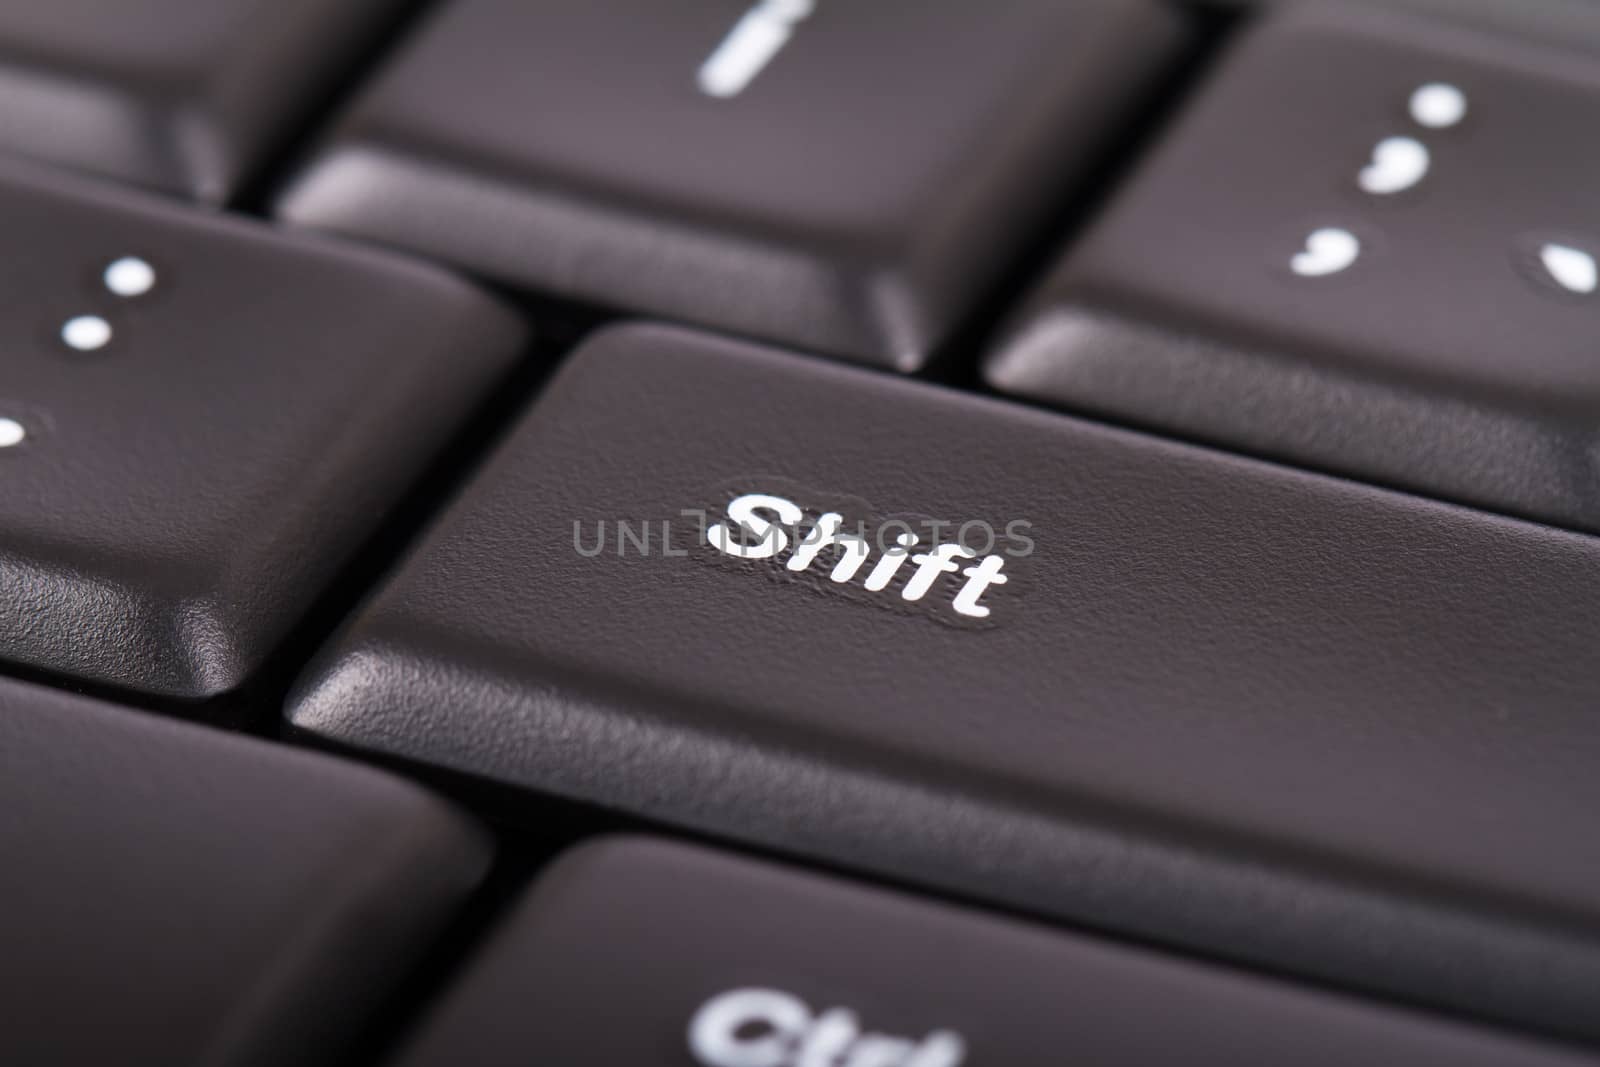 Close up view of shift button on black computer keyboard.